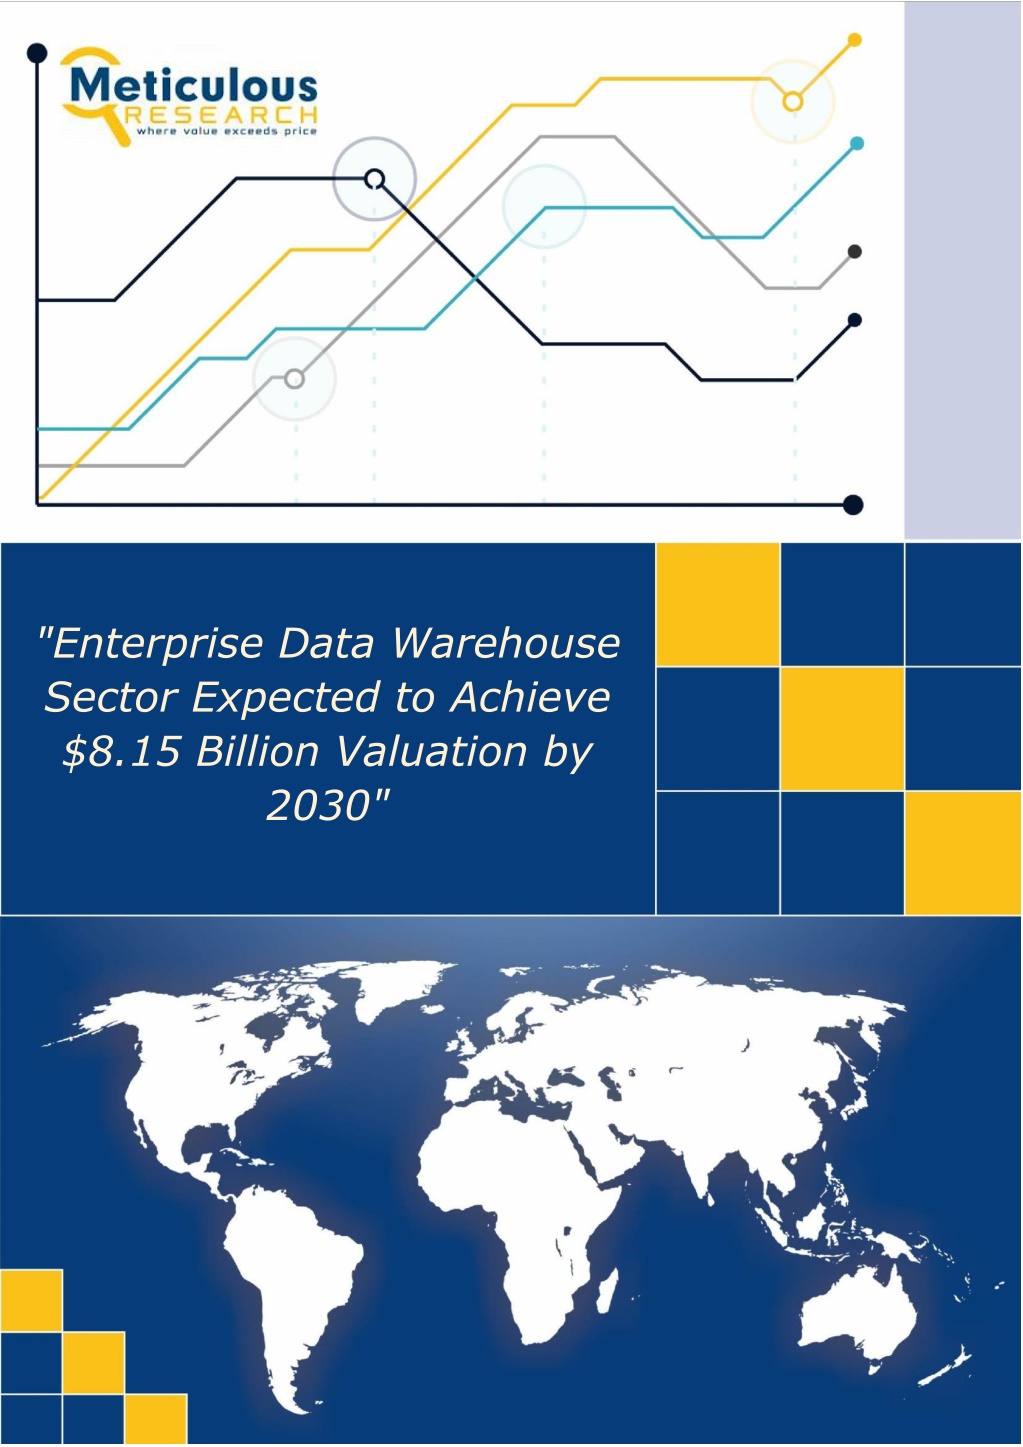 enterprise data warehouse sector expected l.w